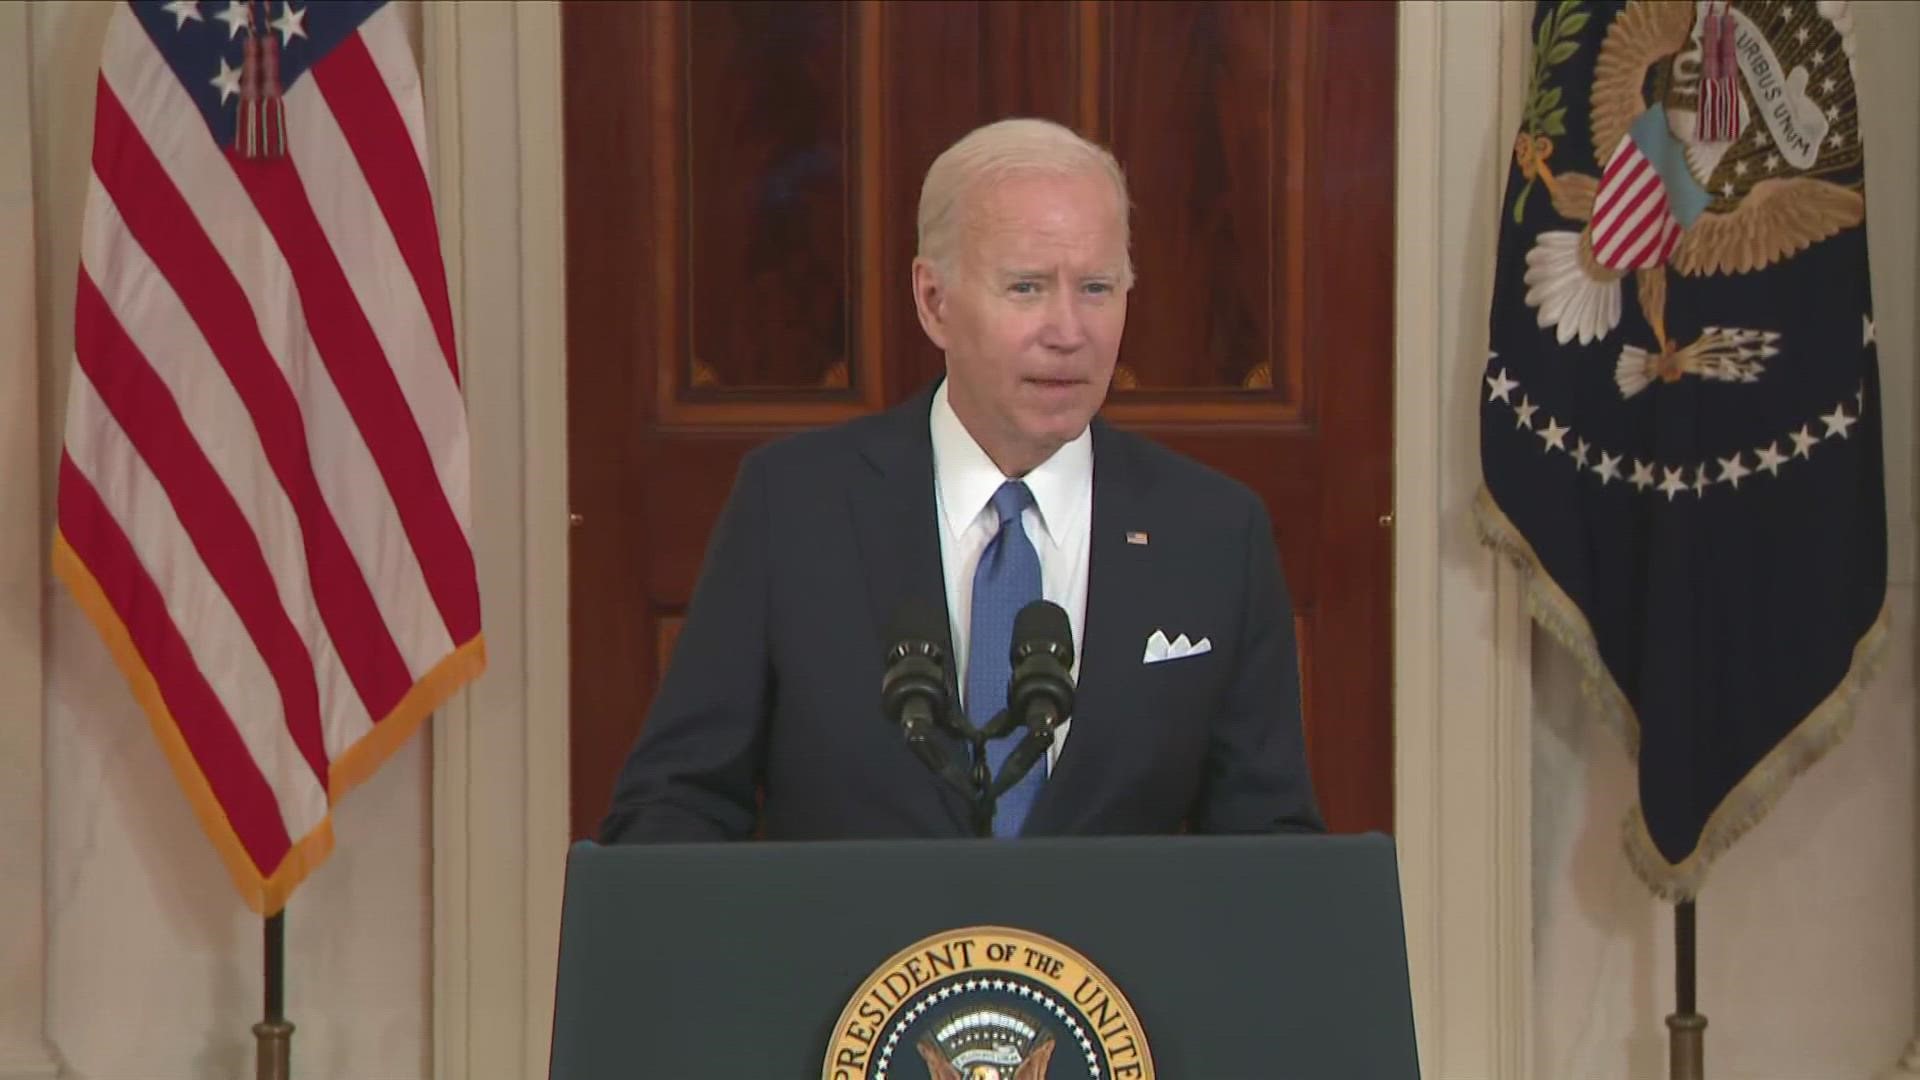 President Joe Biden said that the ruling in Dobbs marks a "sad day for the court and the country."